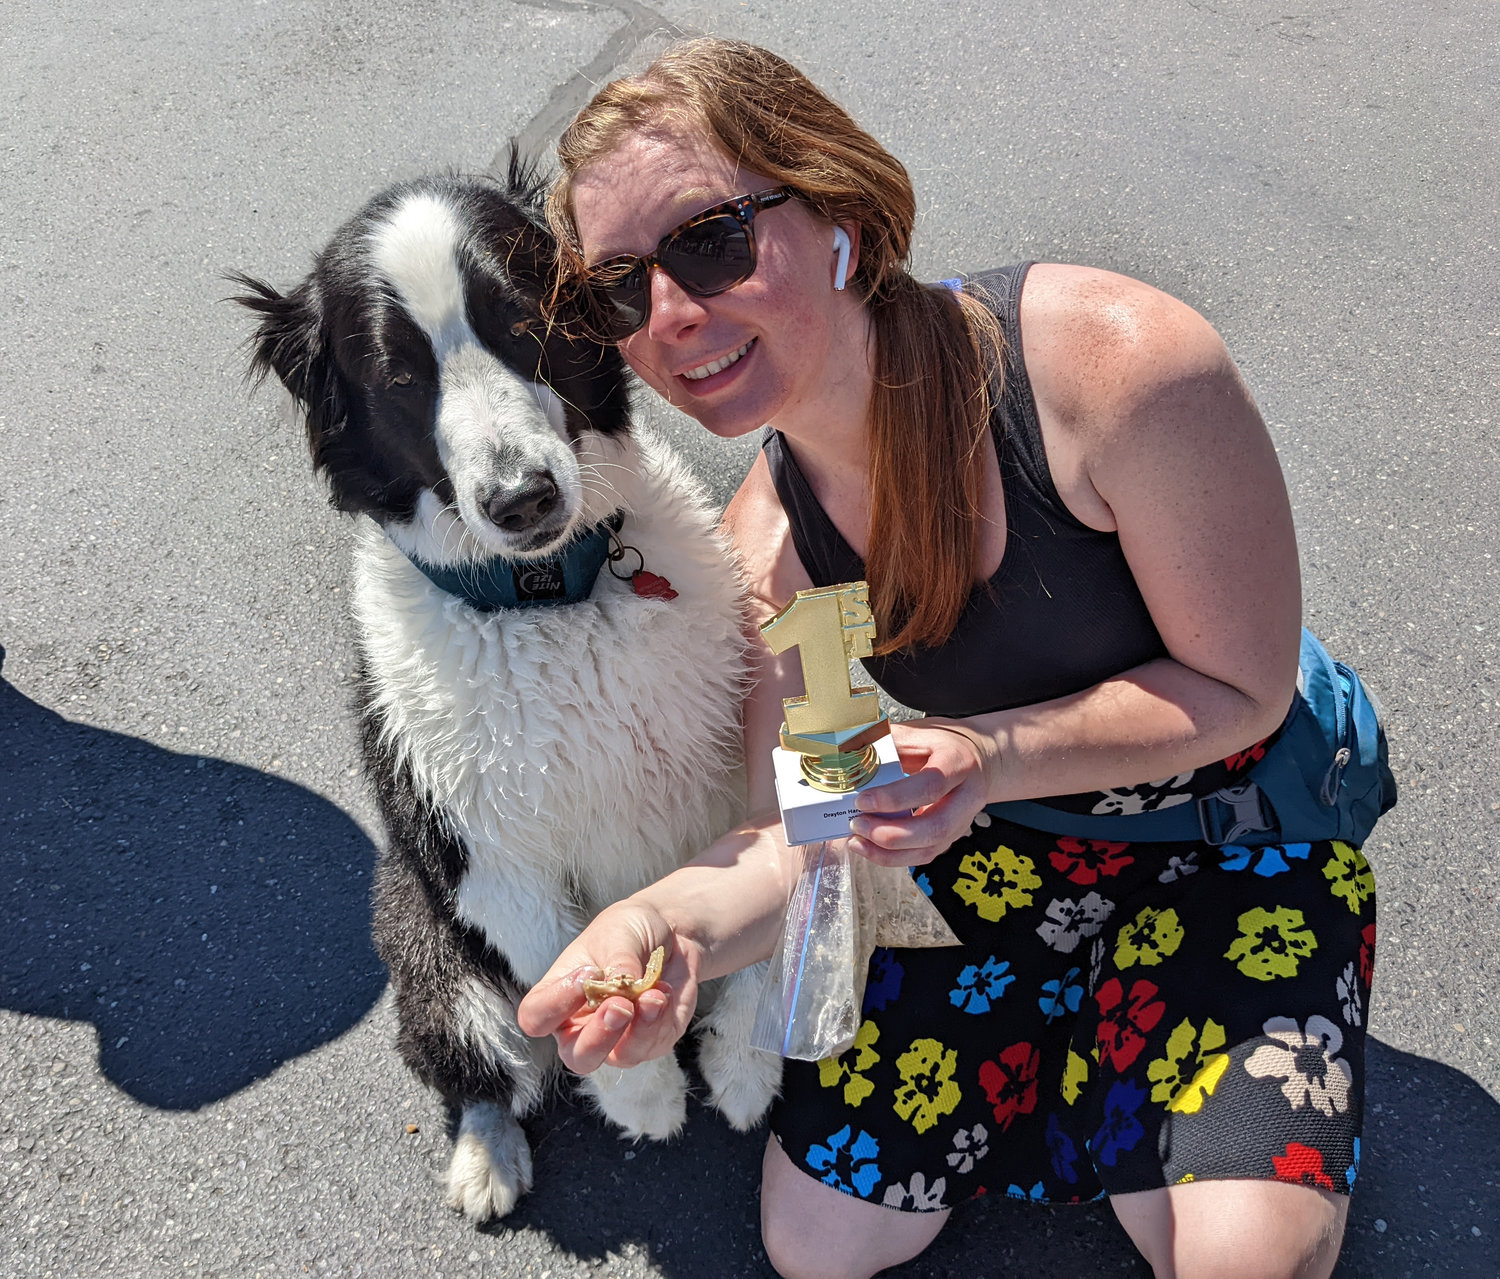 A border collie named Finnegan won first place in the pet contest.